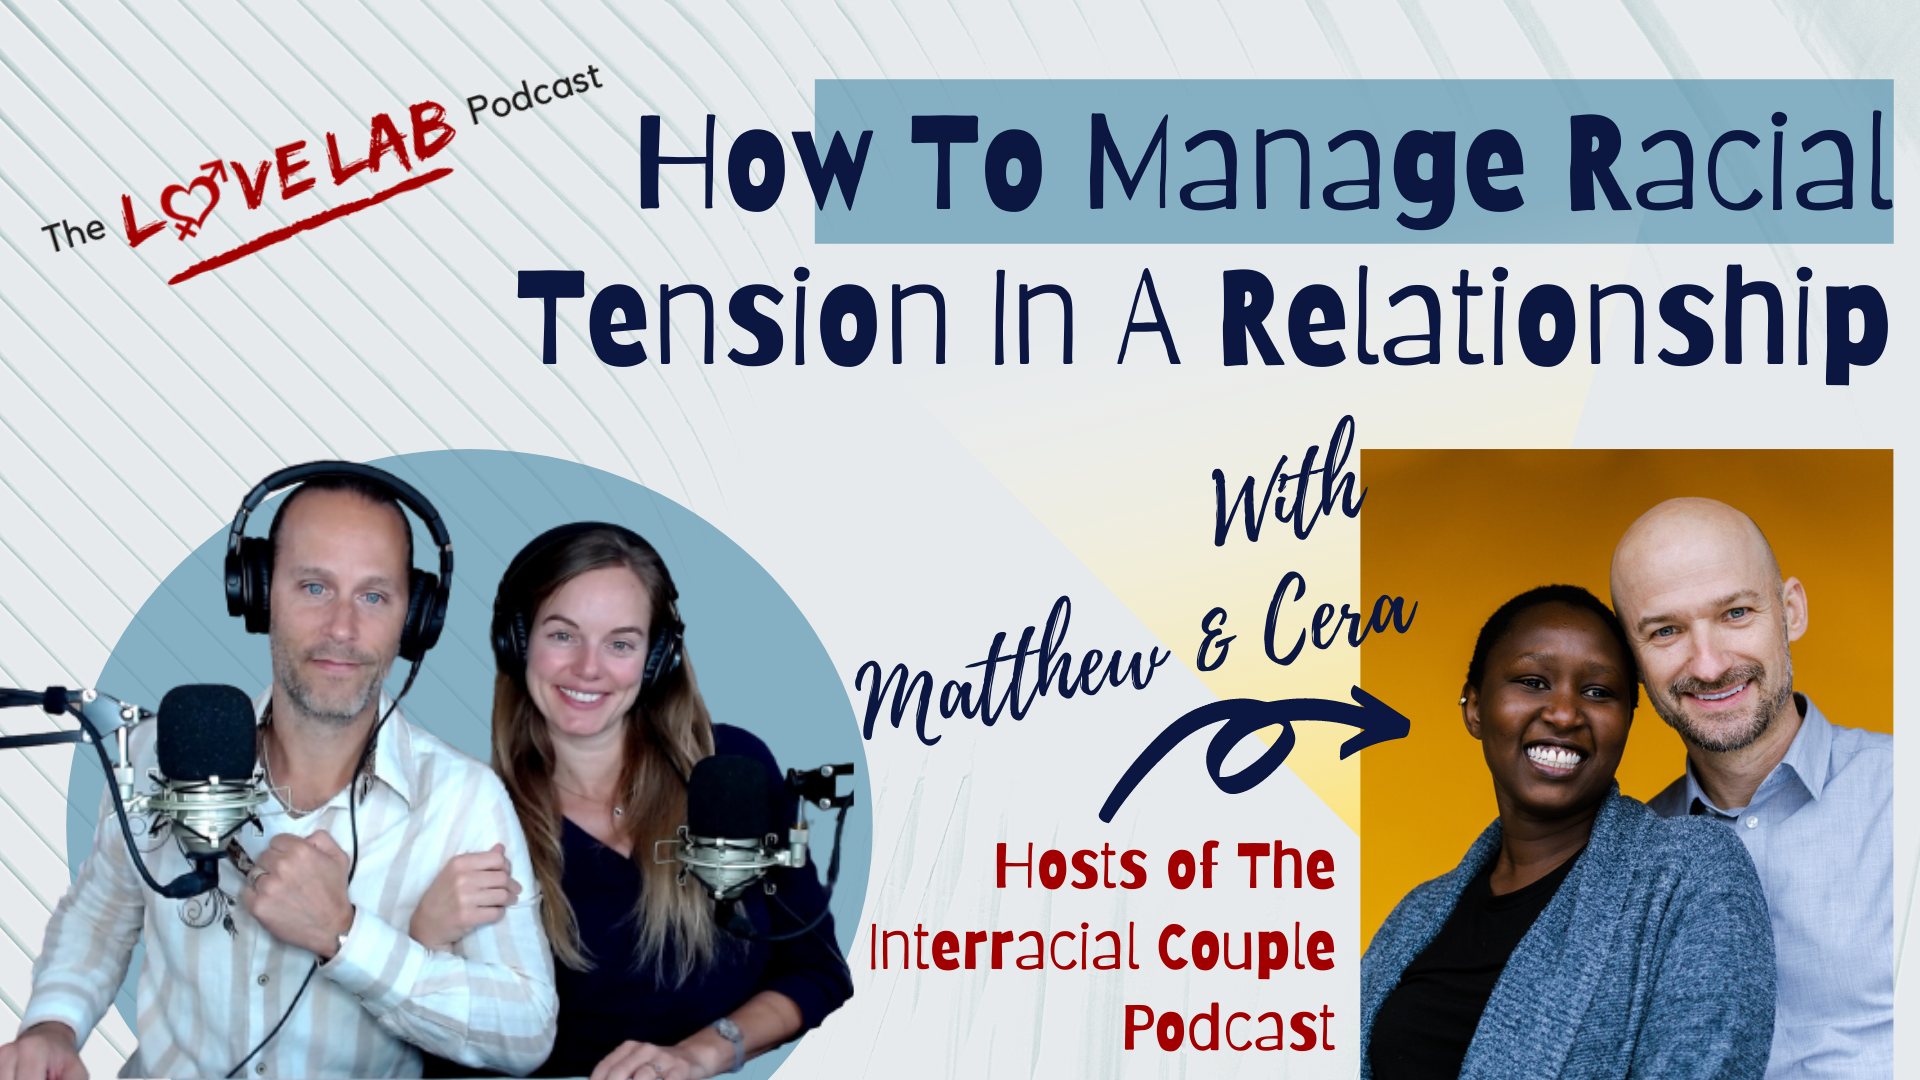 How to manage racial tension in a relationship